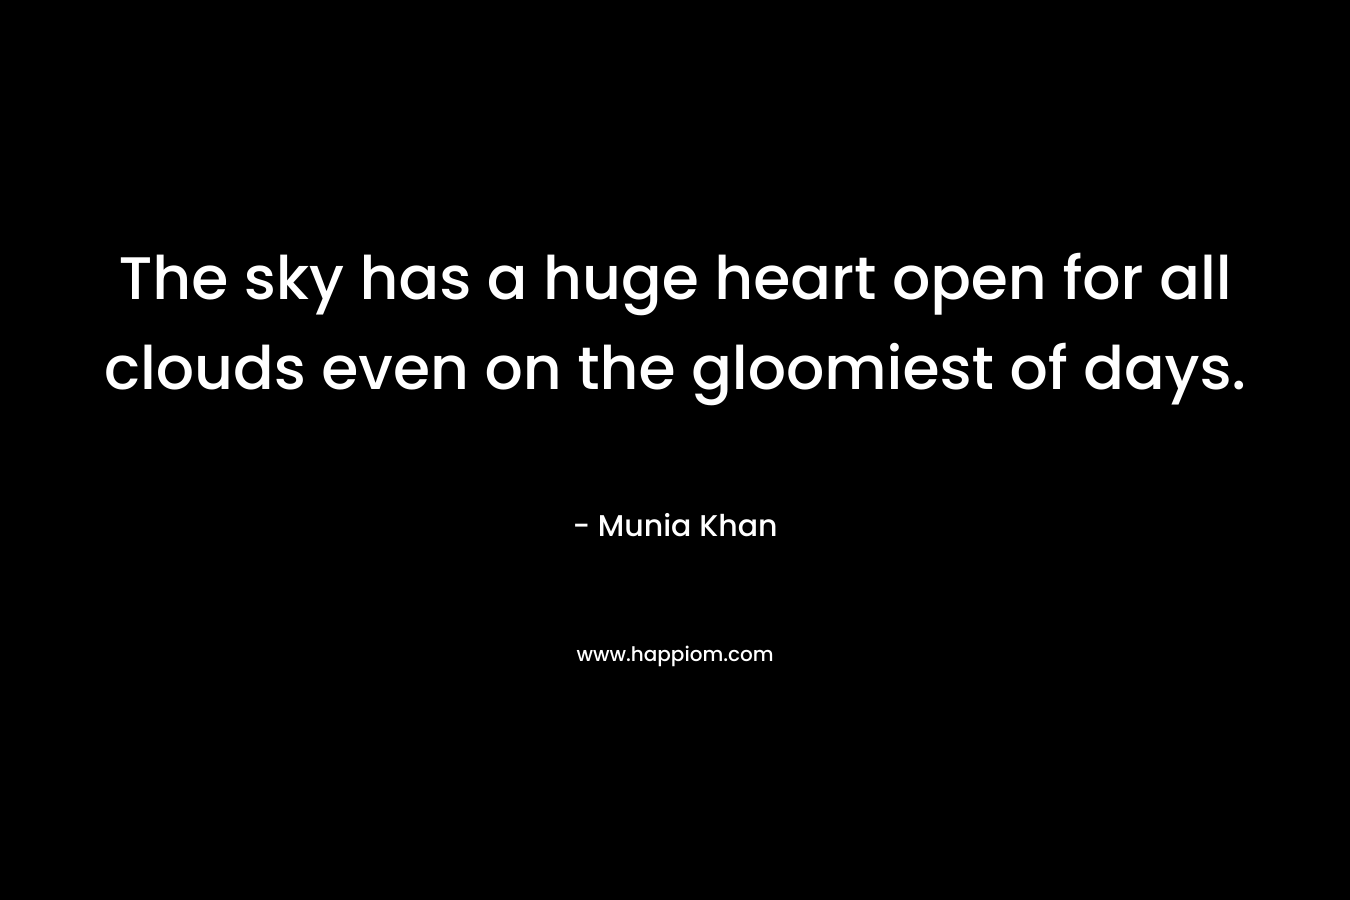 The sky has a huge heart open for all clouds even on the gloomiest of days.